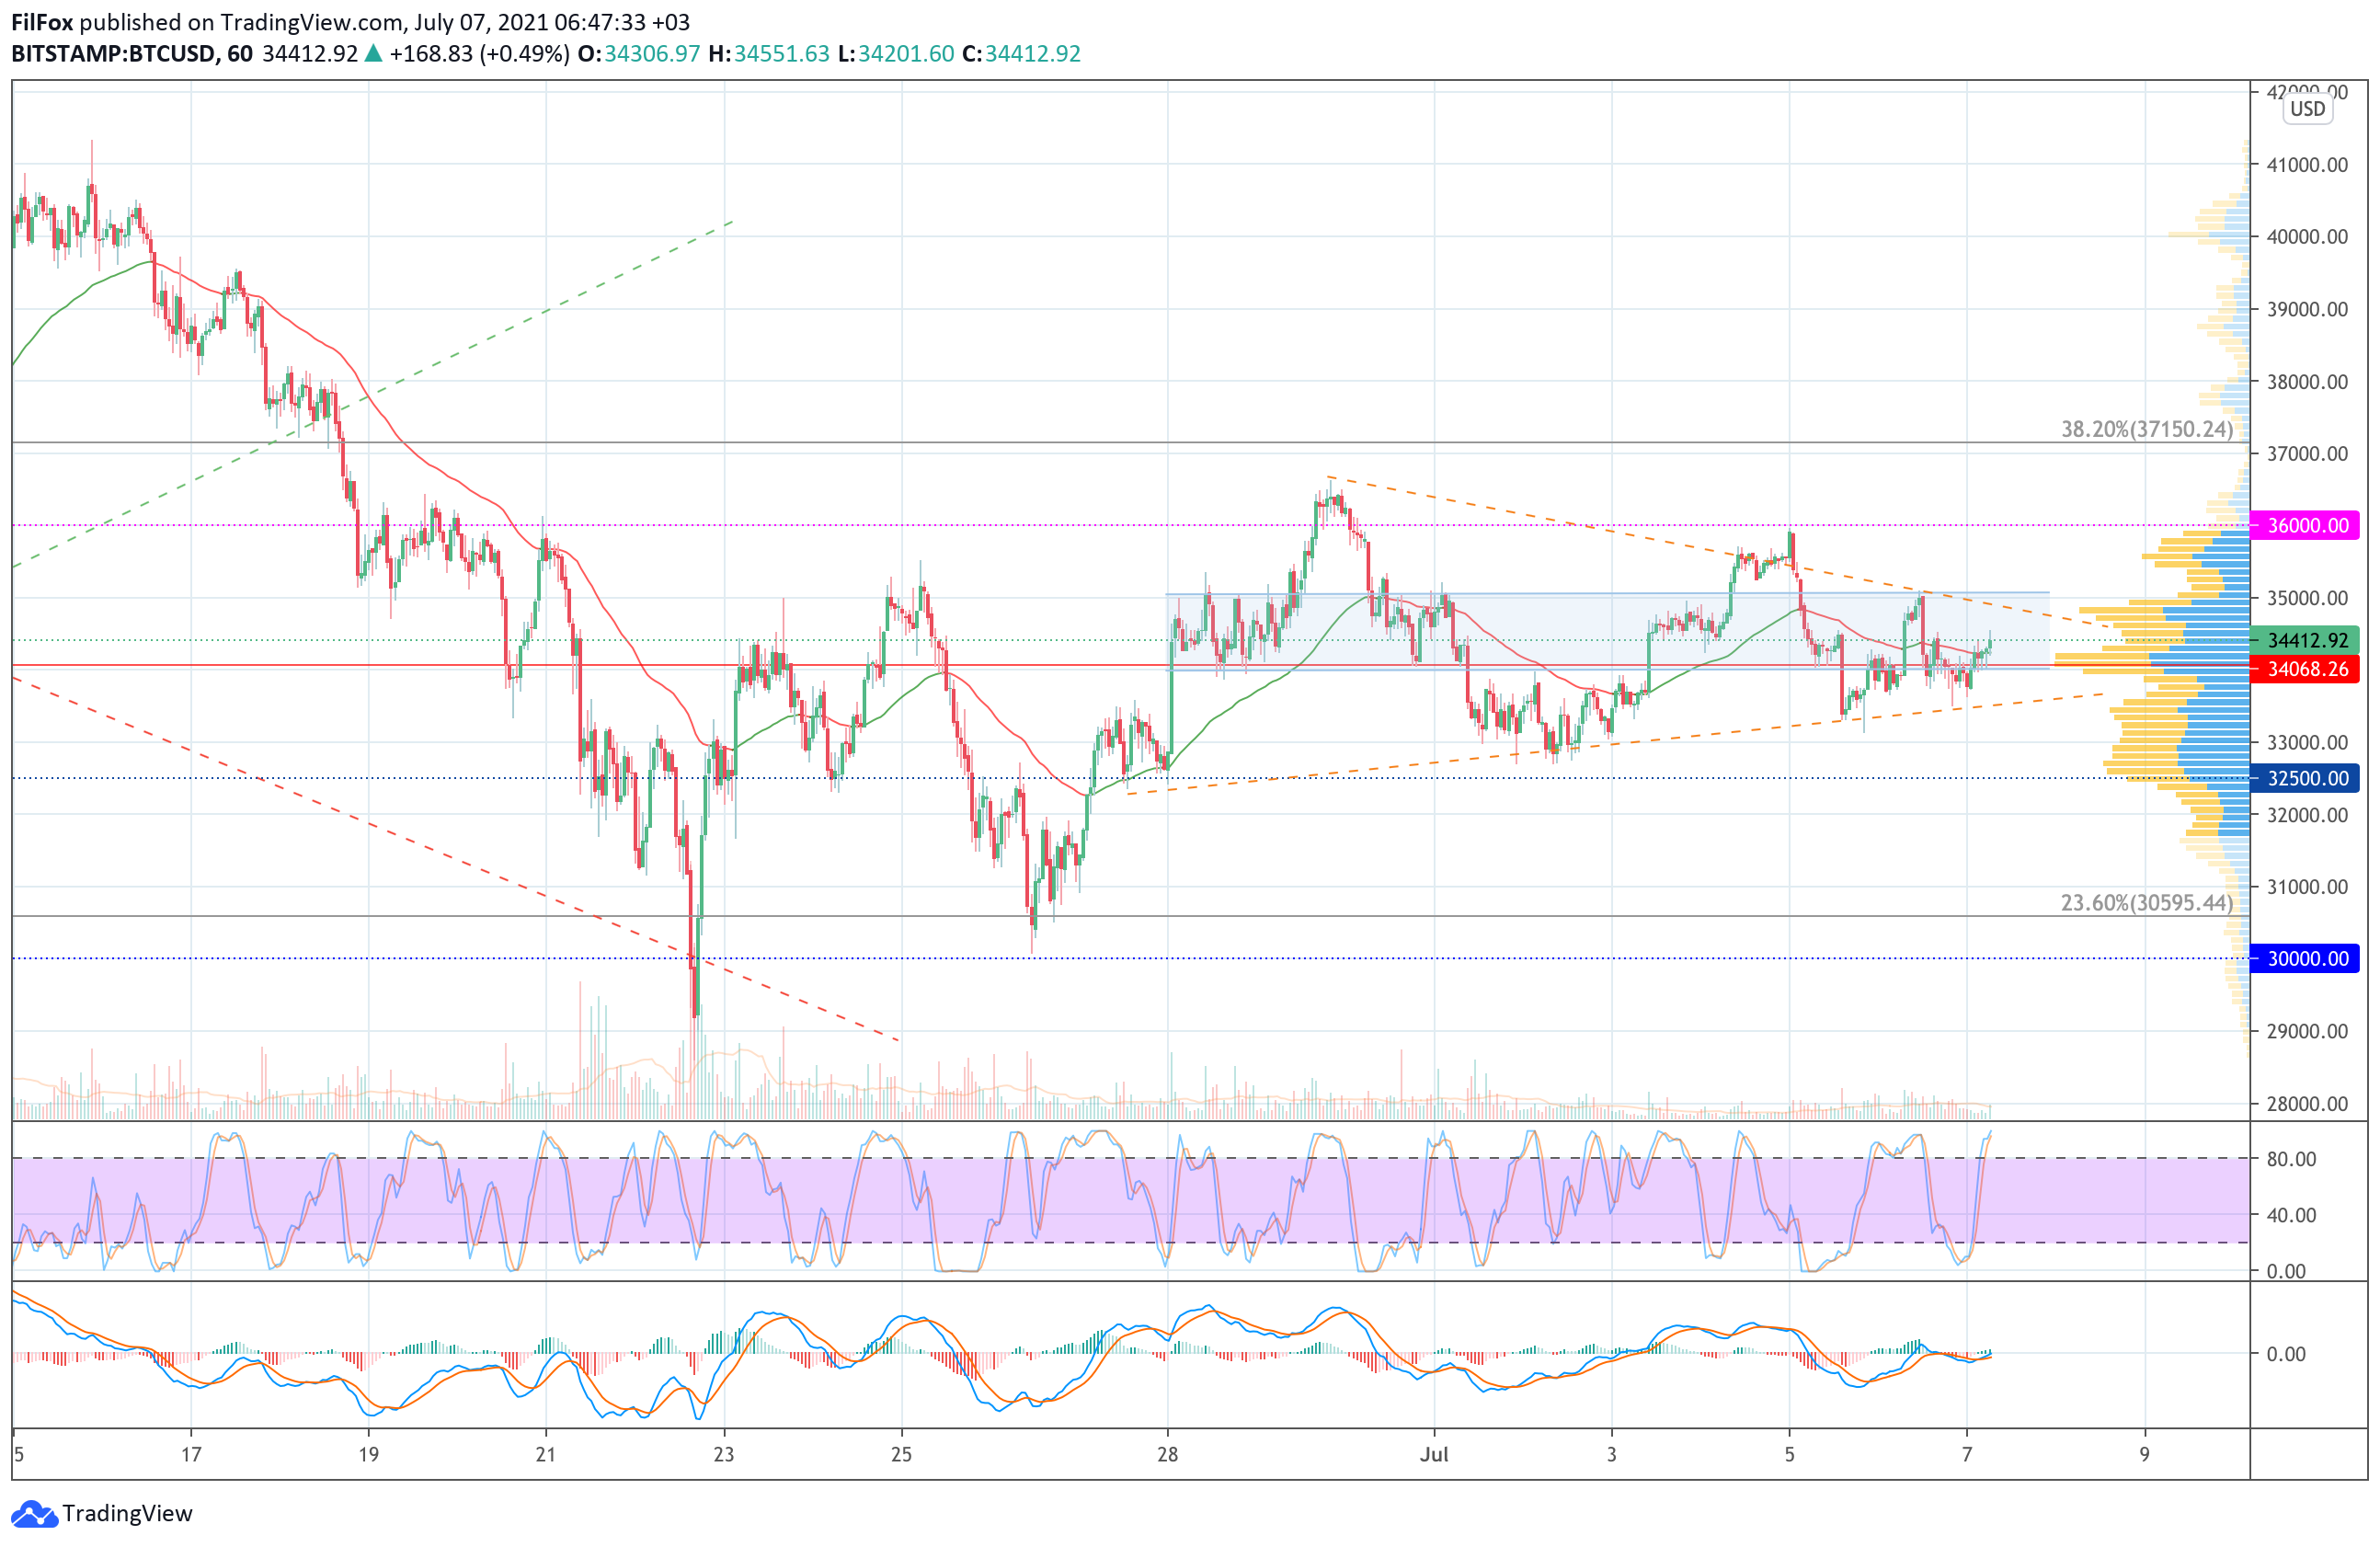 Analysis of the prices of Bitcoin, Ethereum, XRP for 07/07/2021